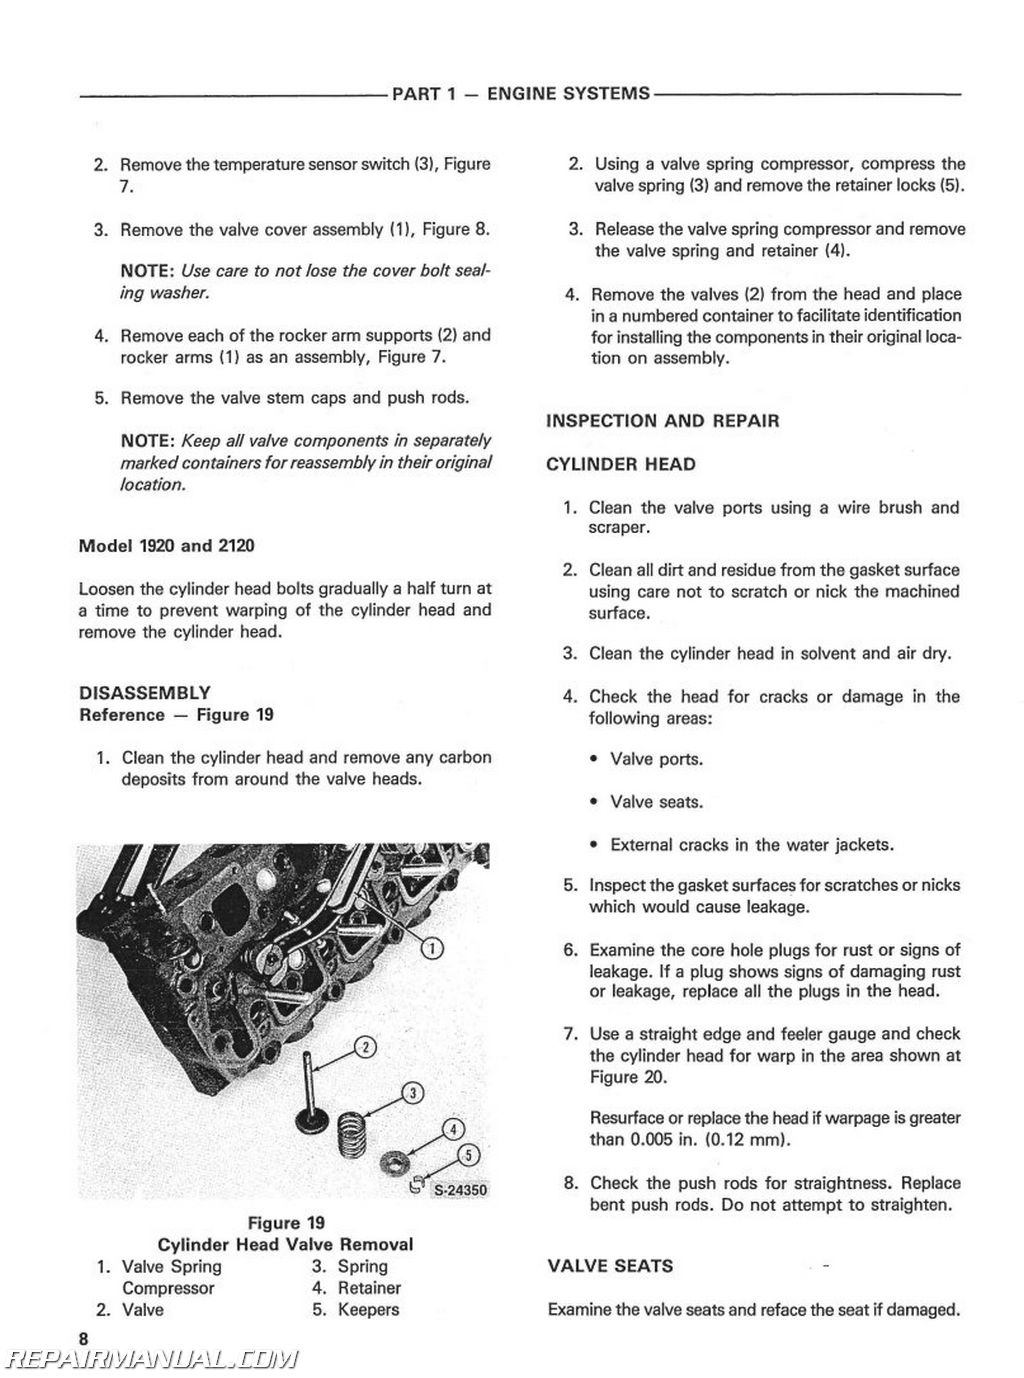 Ford 2120 factory manual #8